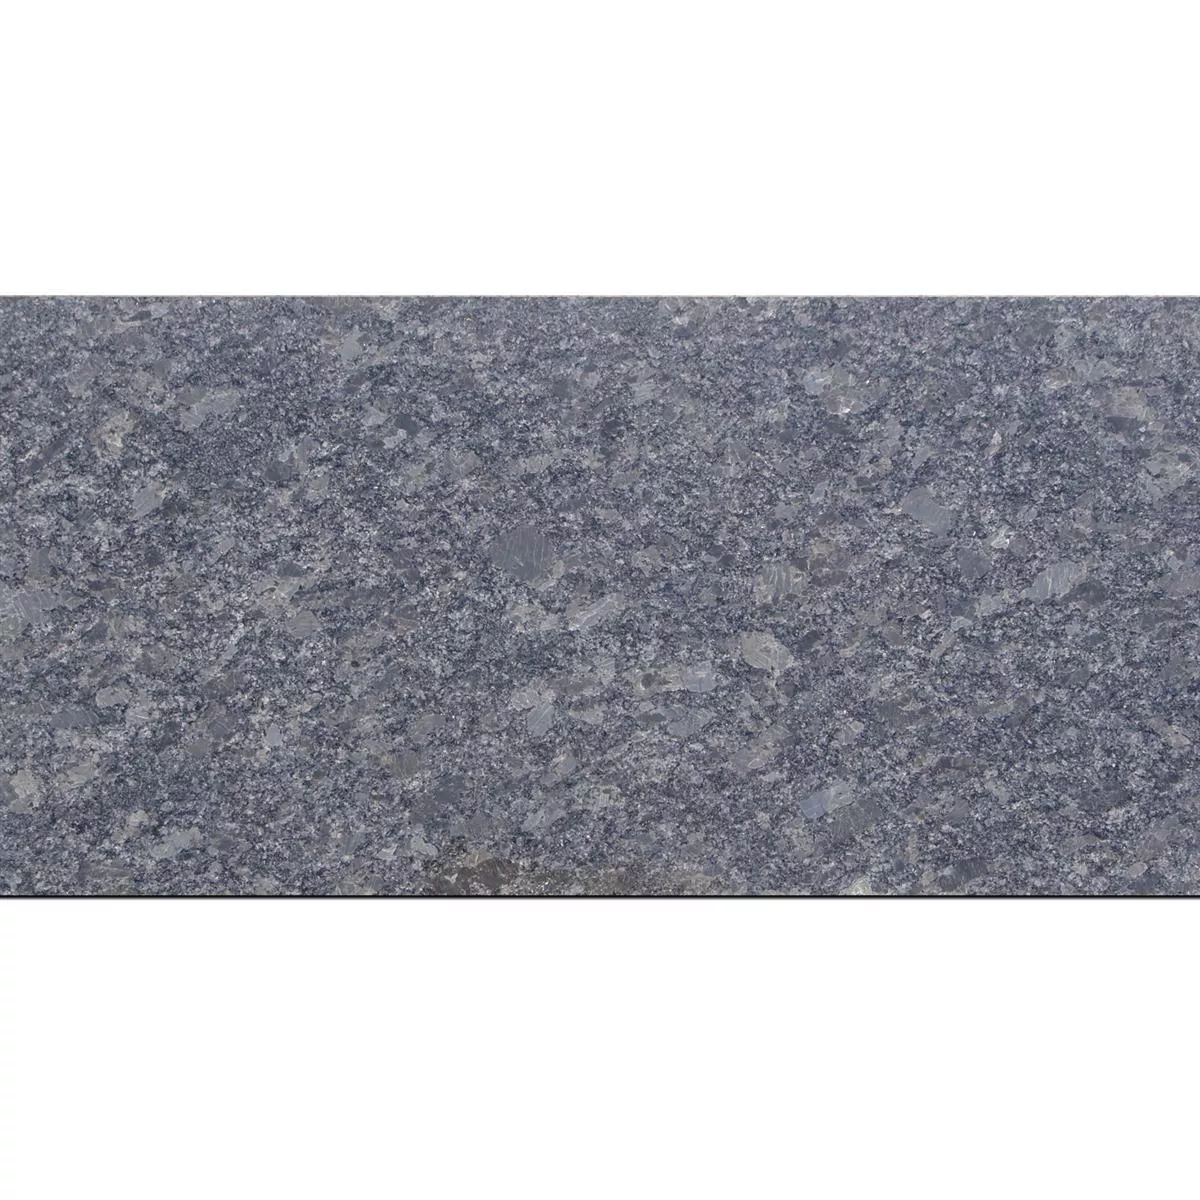 Muster Natursteinfliesen Granit Old Grey Lappato 30,5x61cm